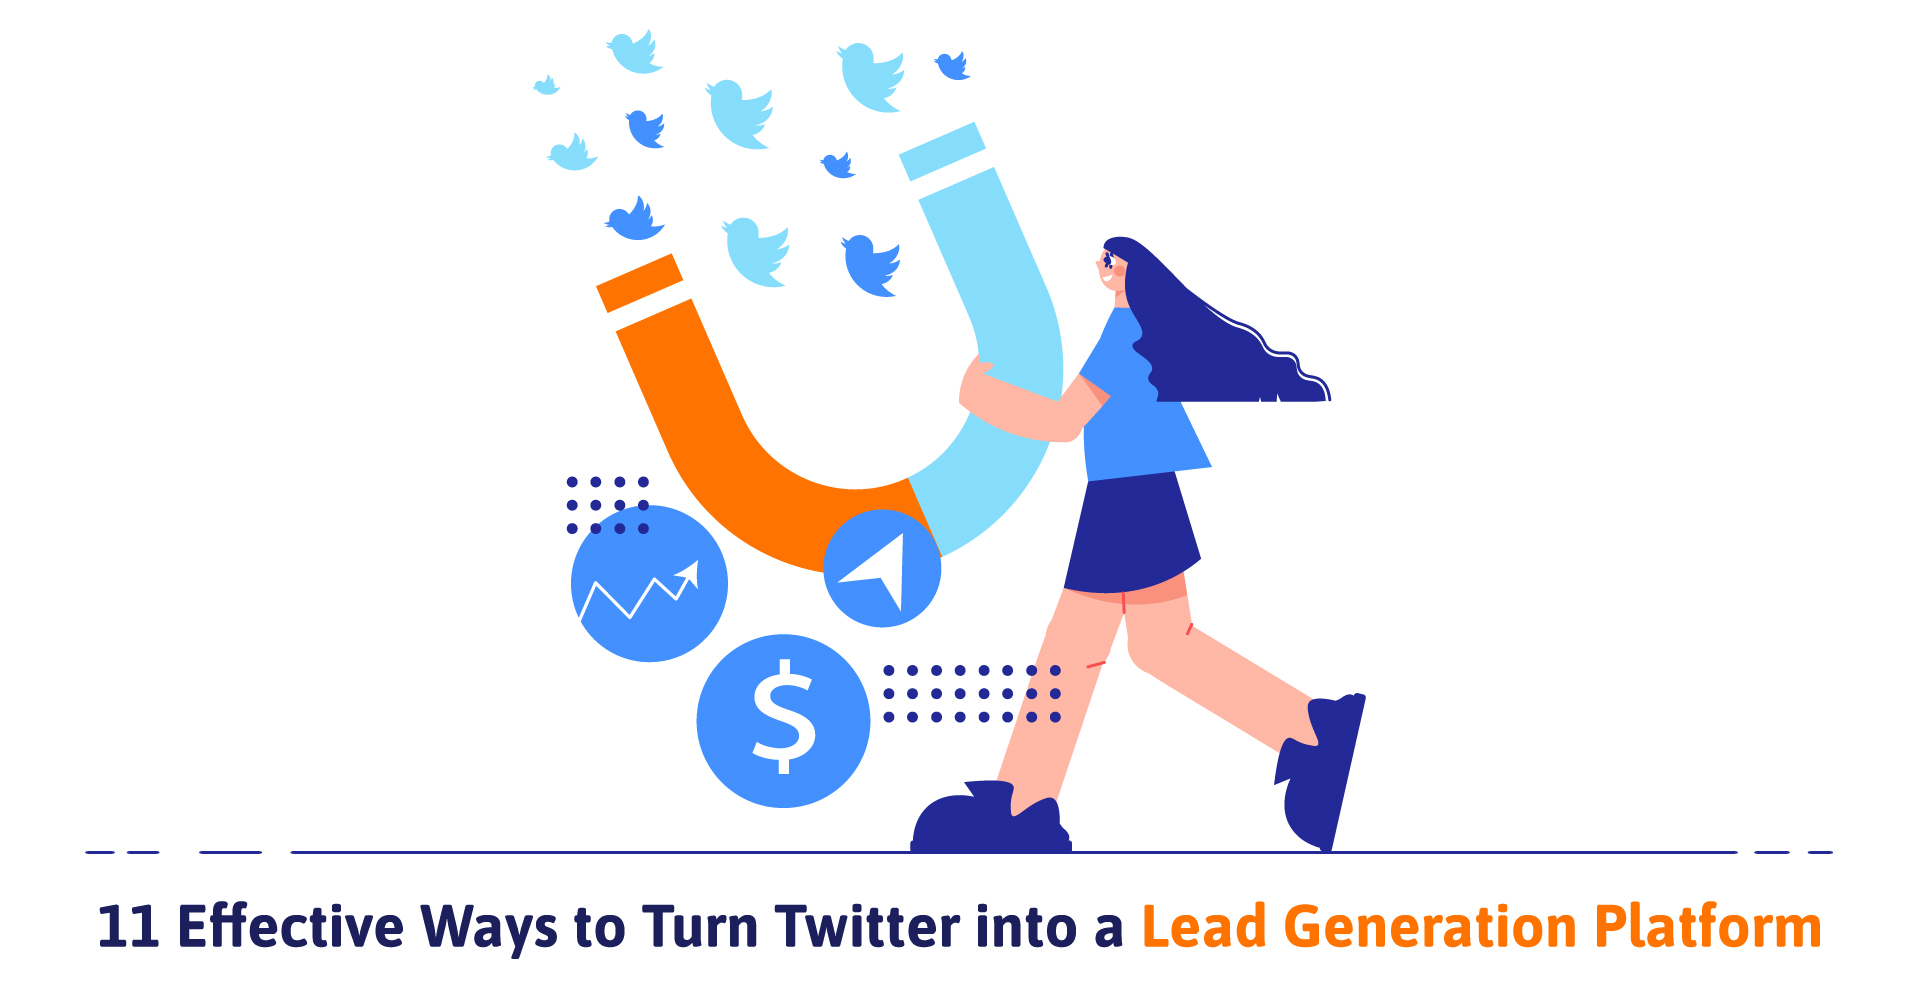 11 Effective Ways to Turn Twitter into a Lead Generation Platform